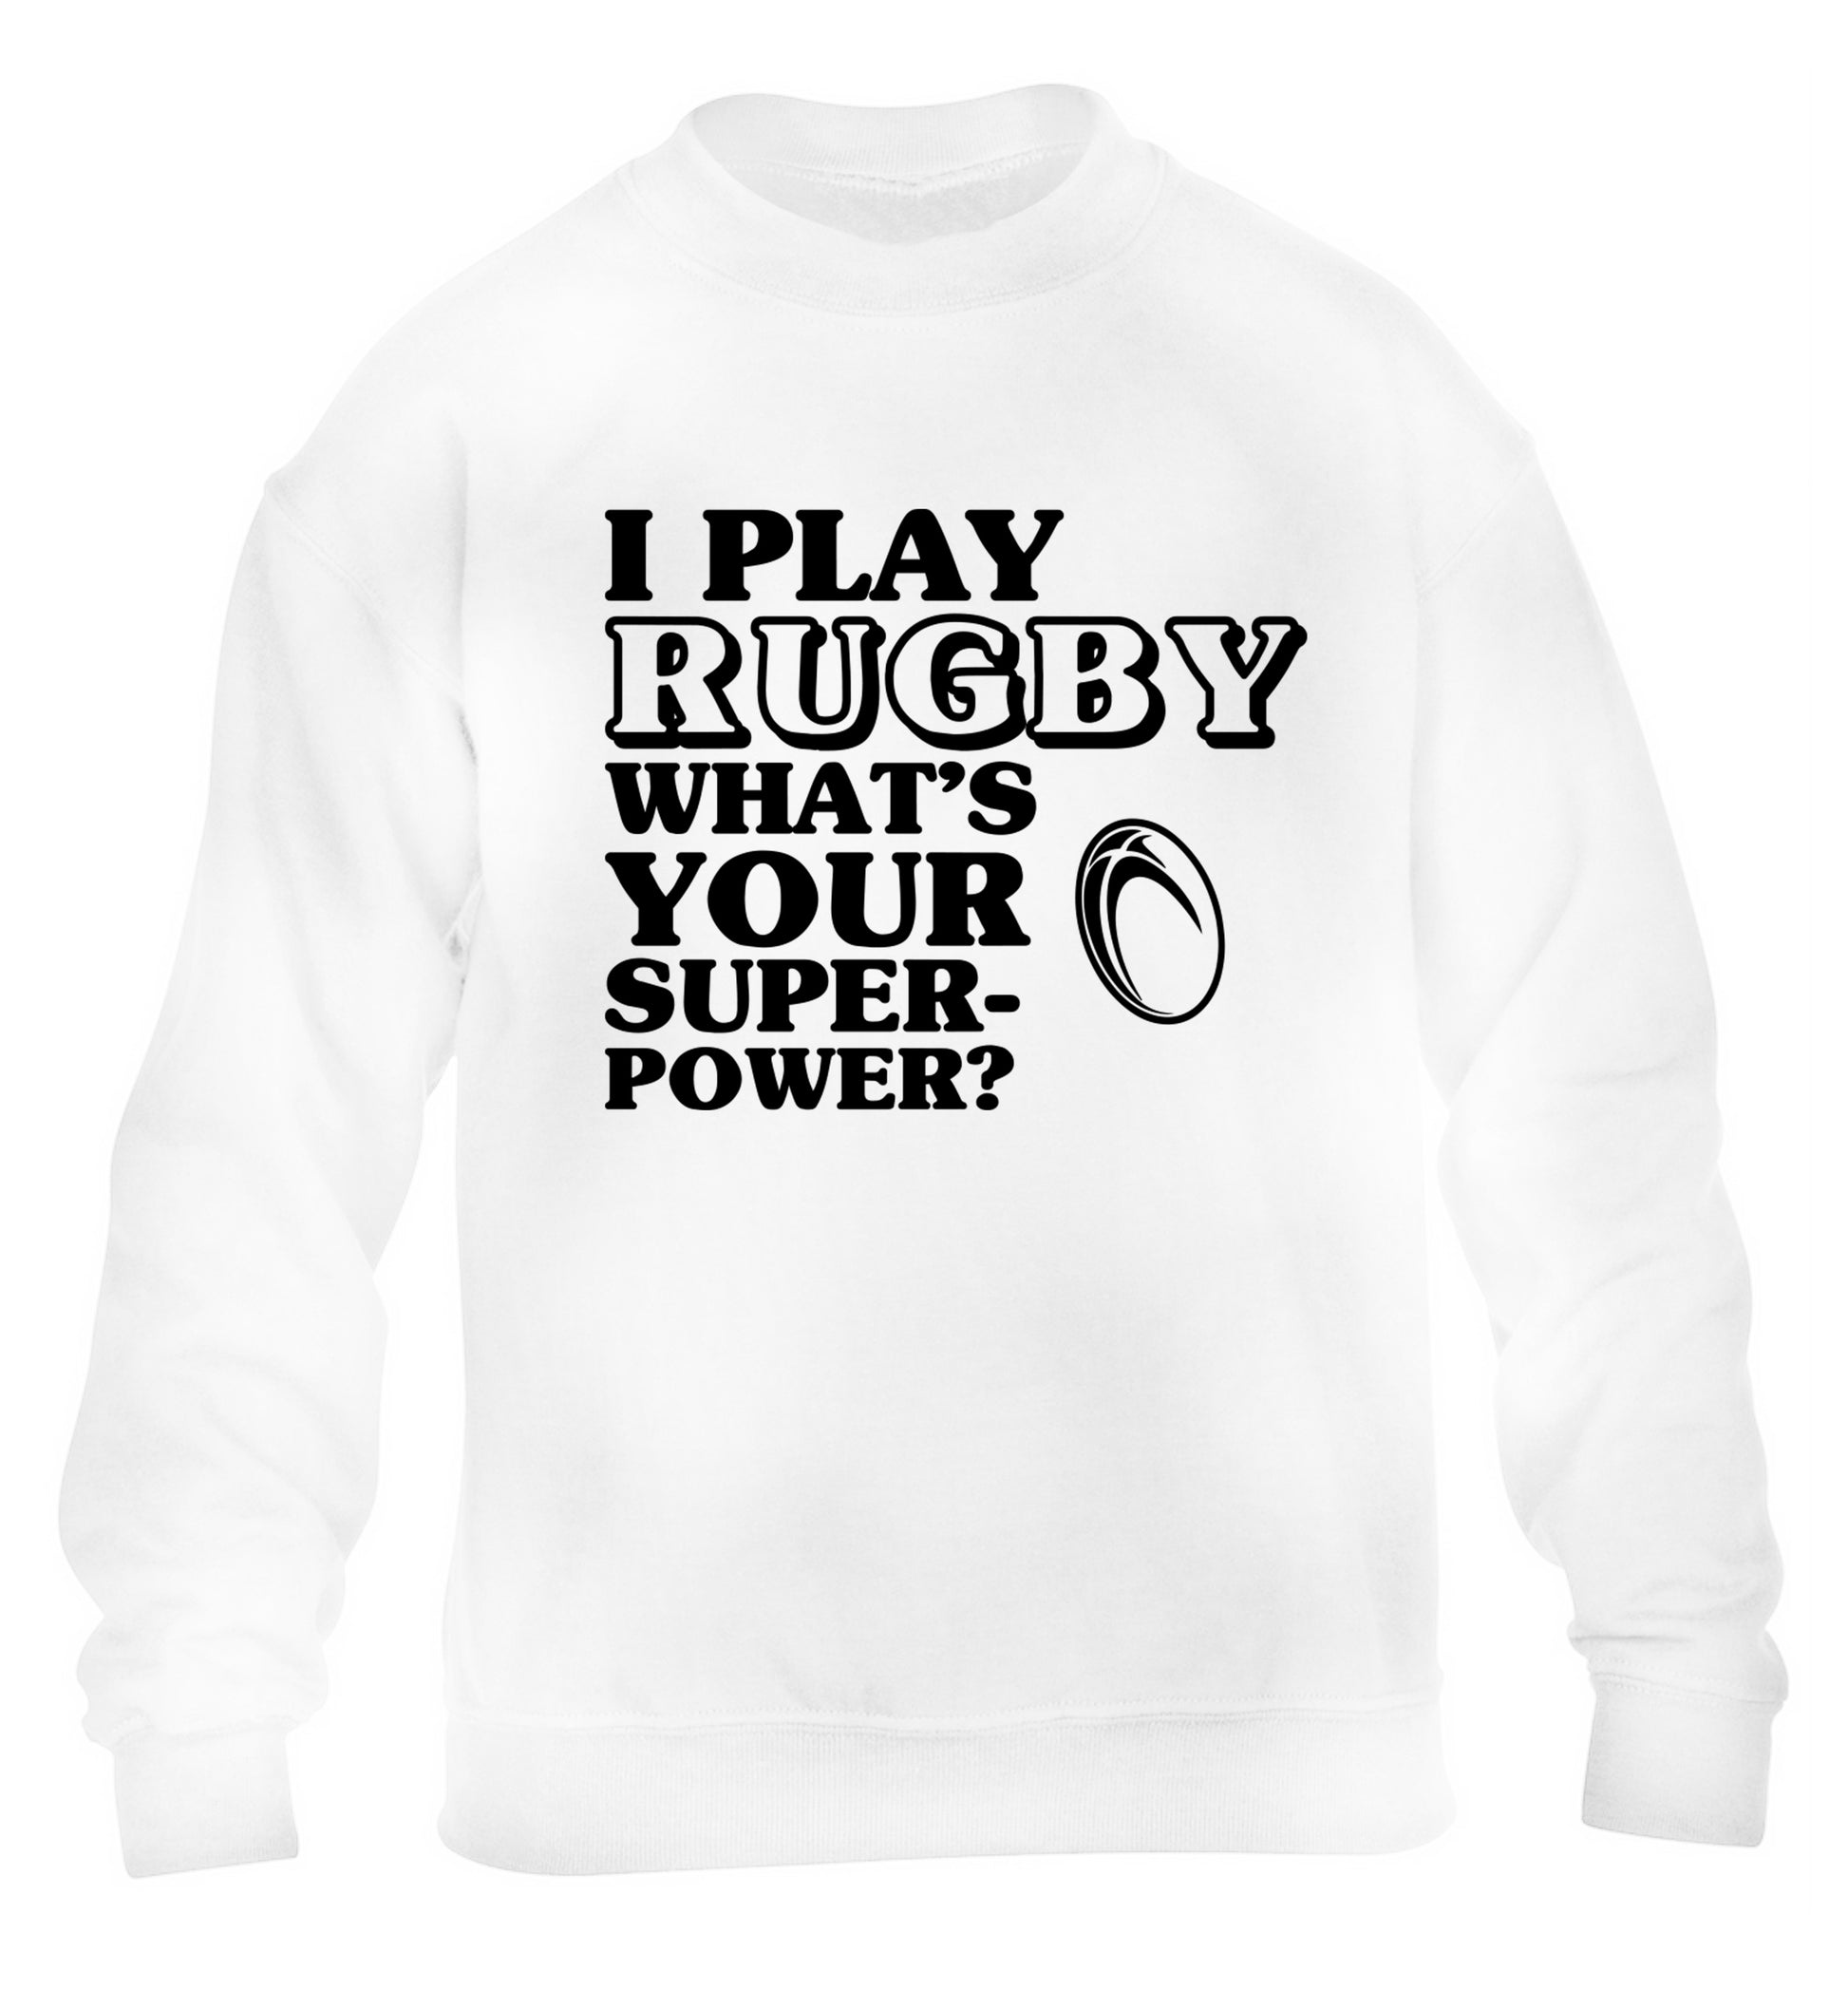 I play rugby what's your superpower? children's white sweater 12-13 Years